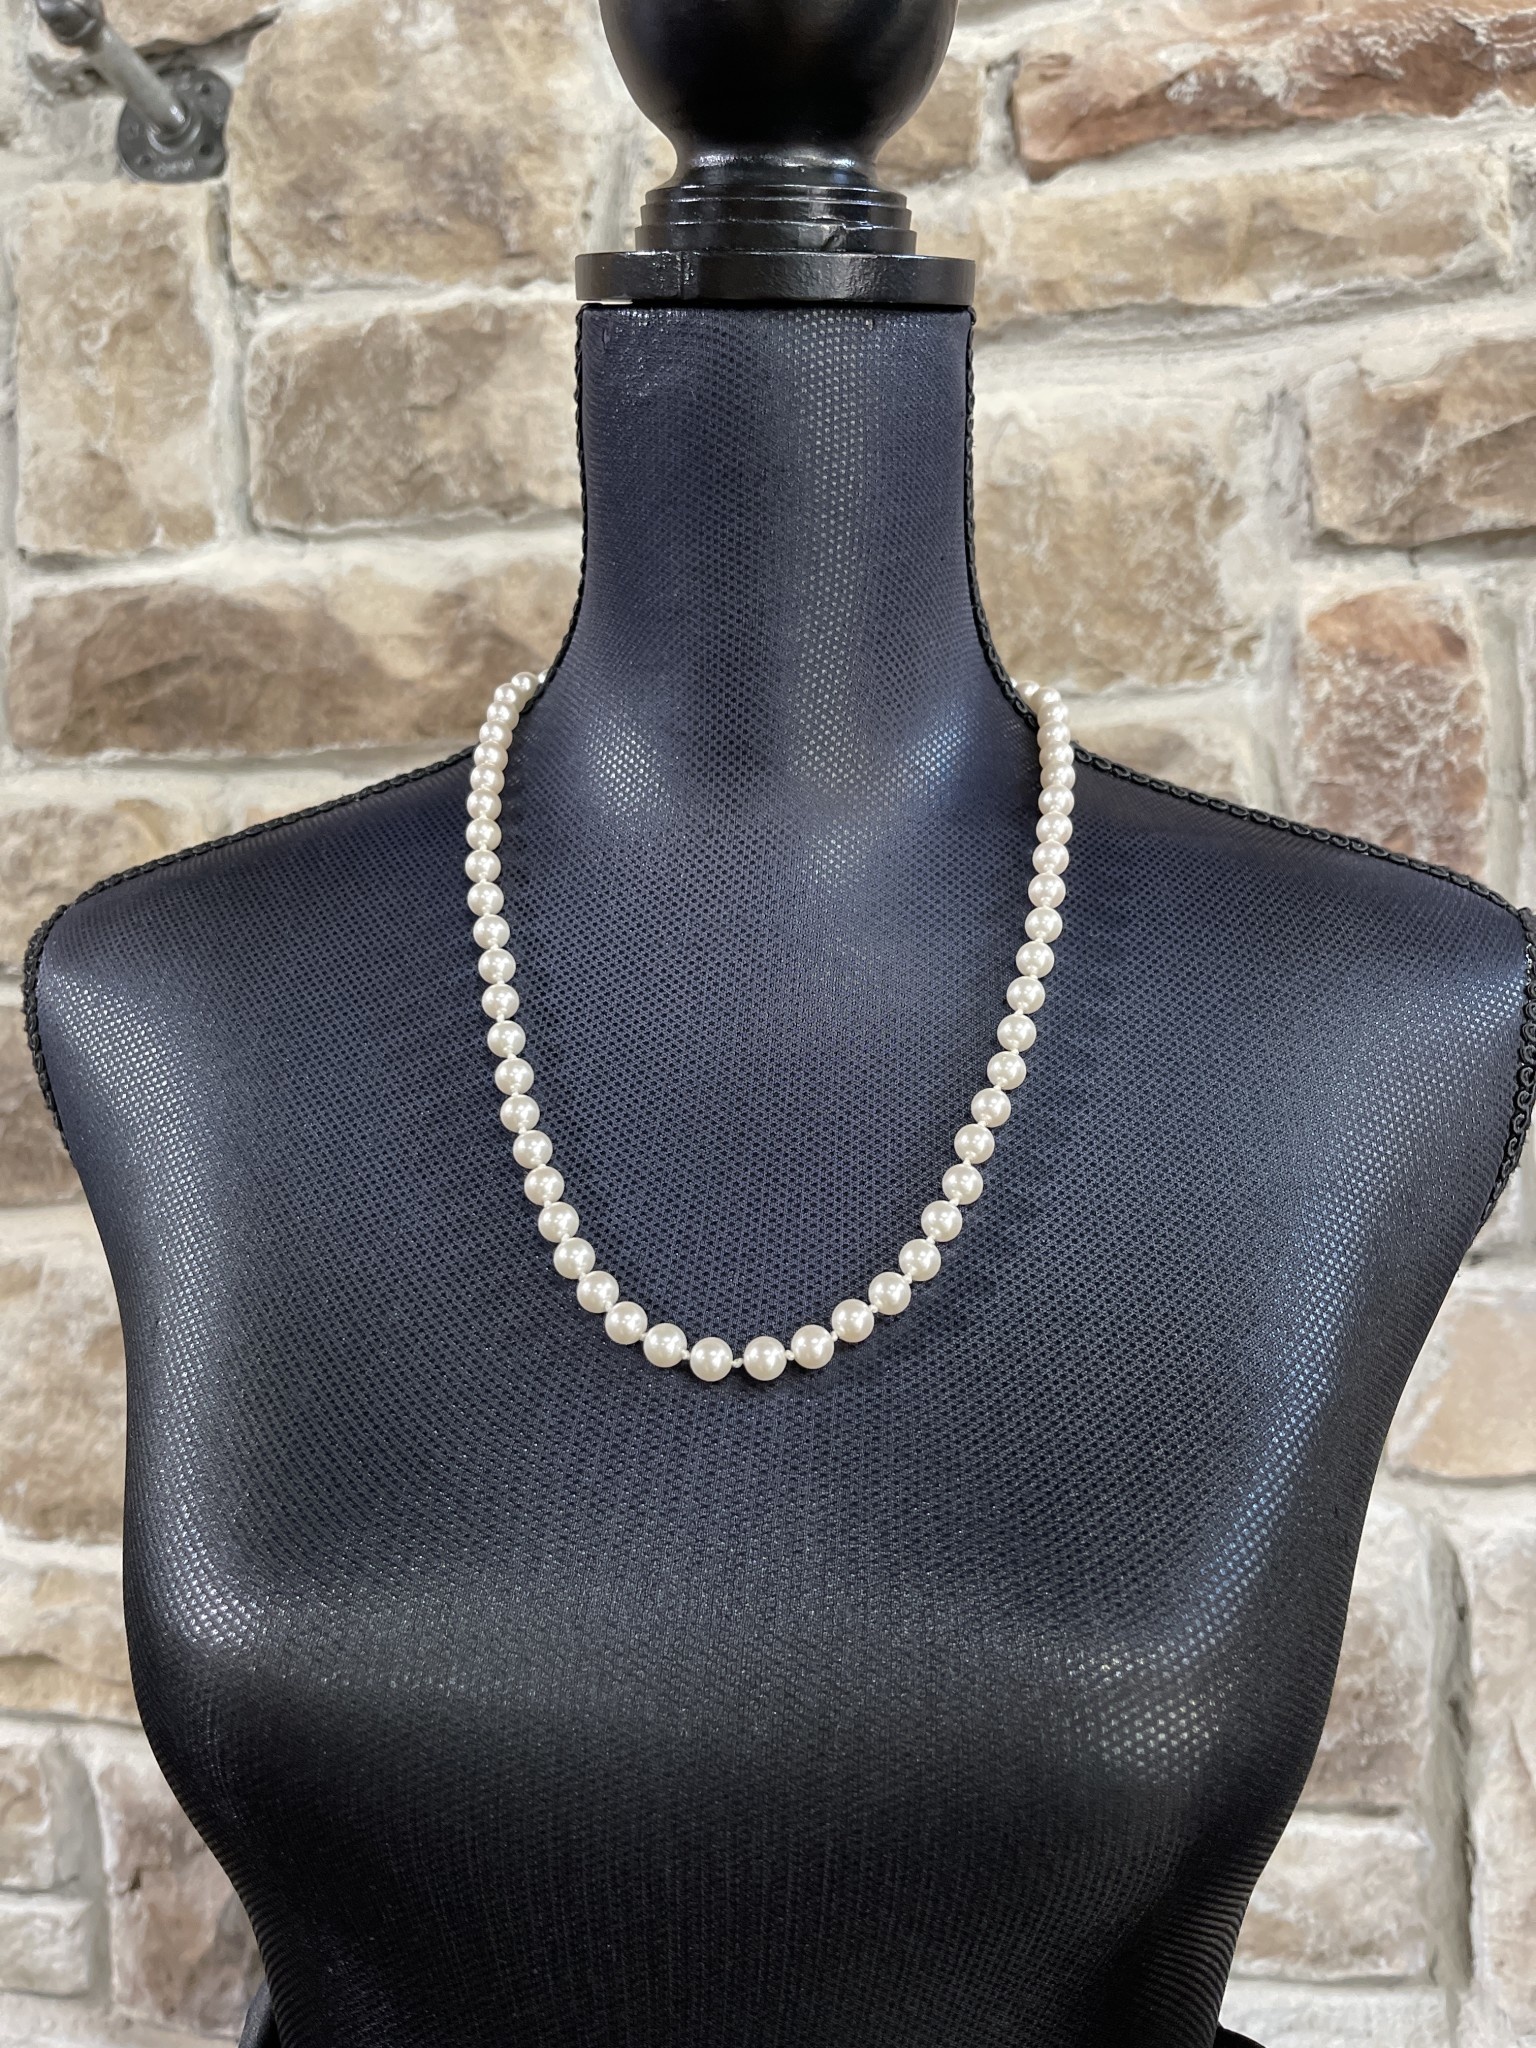 Long 22-24 inch 2 Rows Natural 8-9mm White Freshwater Cultured Pearl  Necklace | eBay